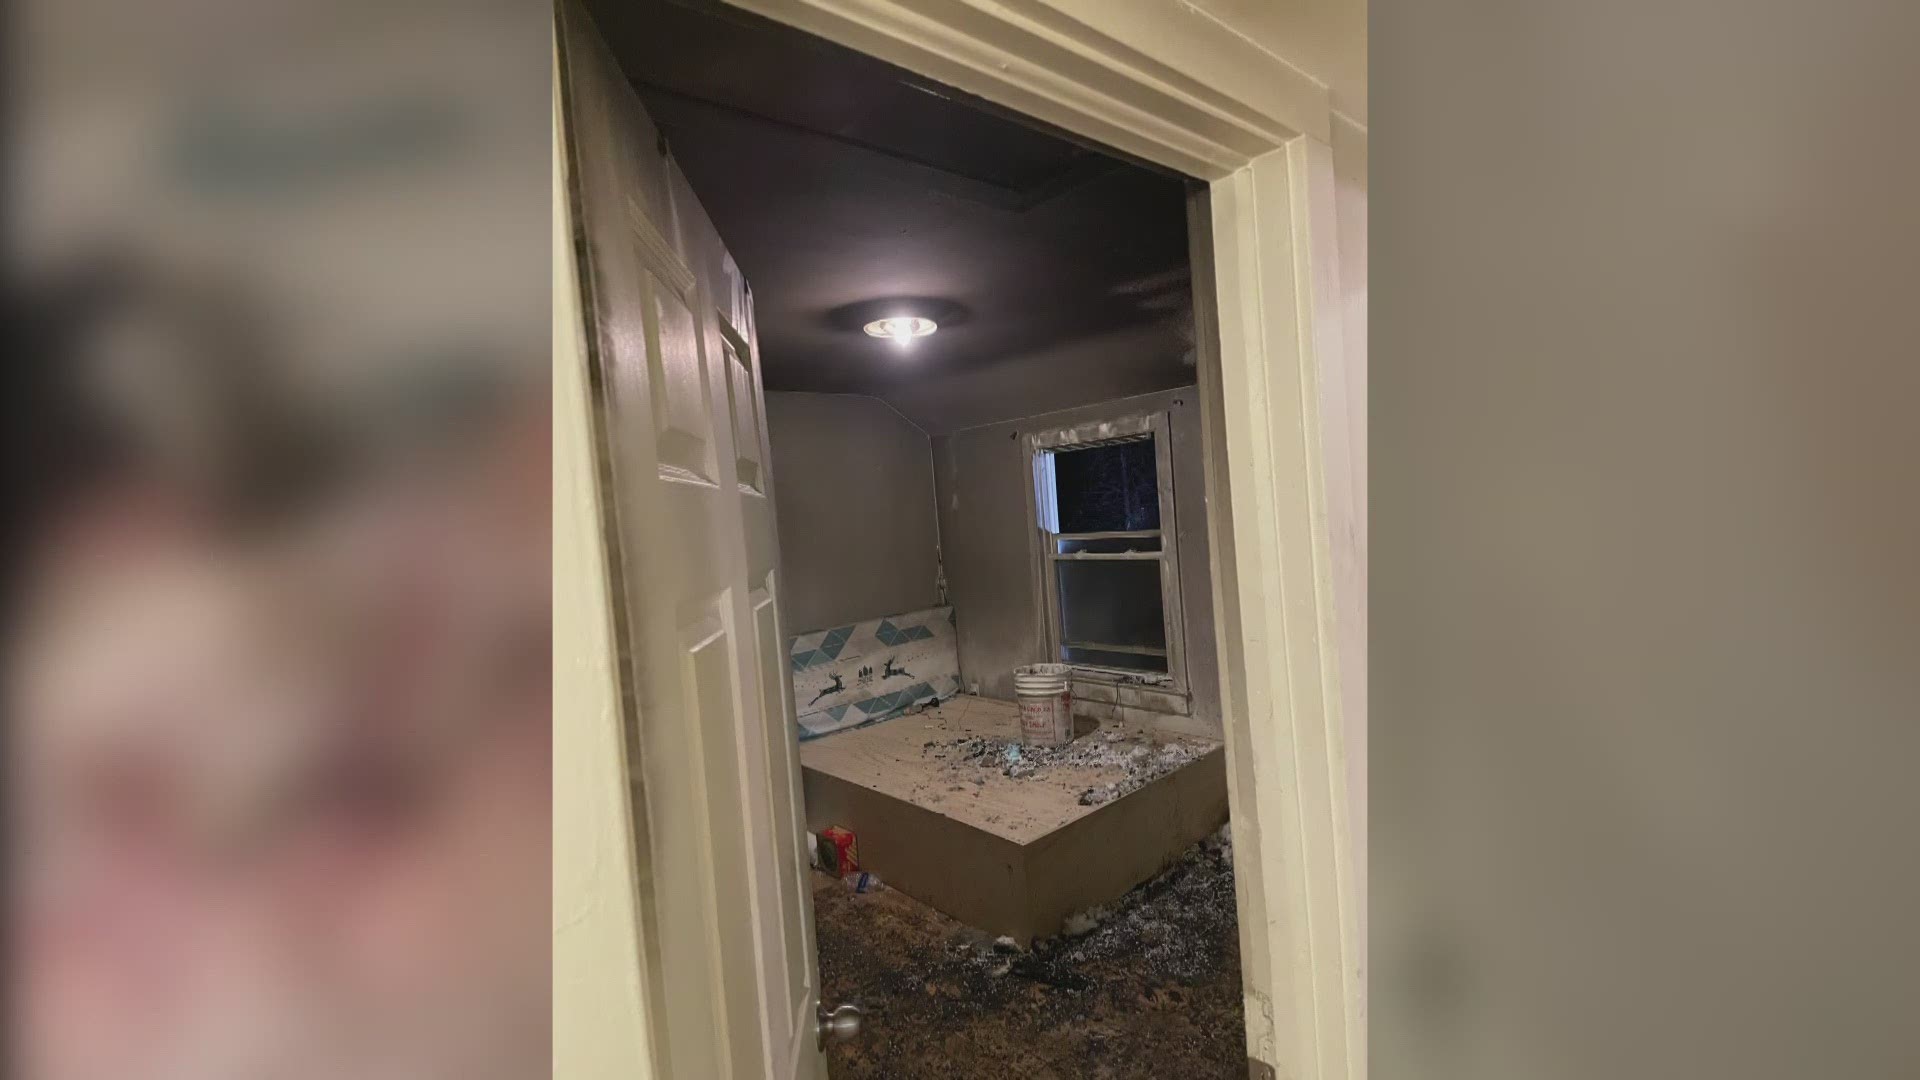 Firefighters say the closed bedroom door saved things from being a lot worse than they were.